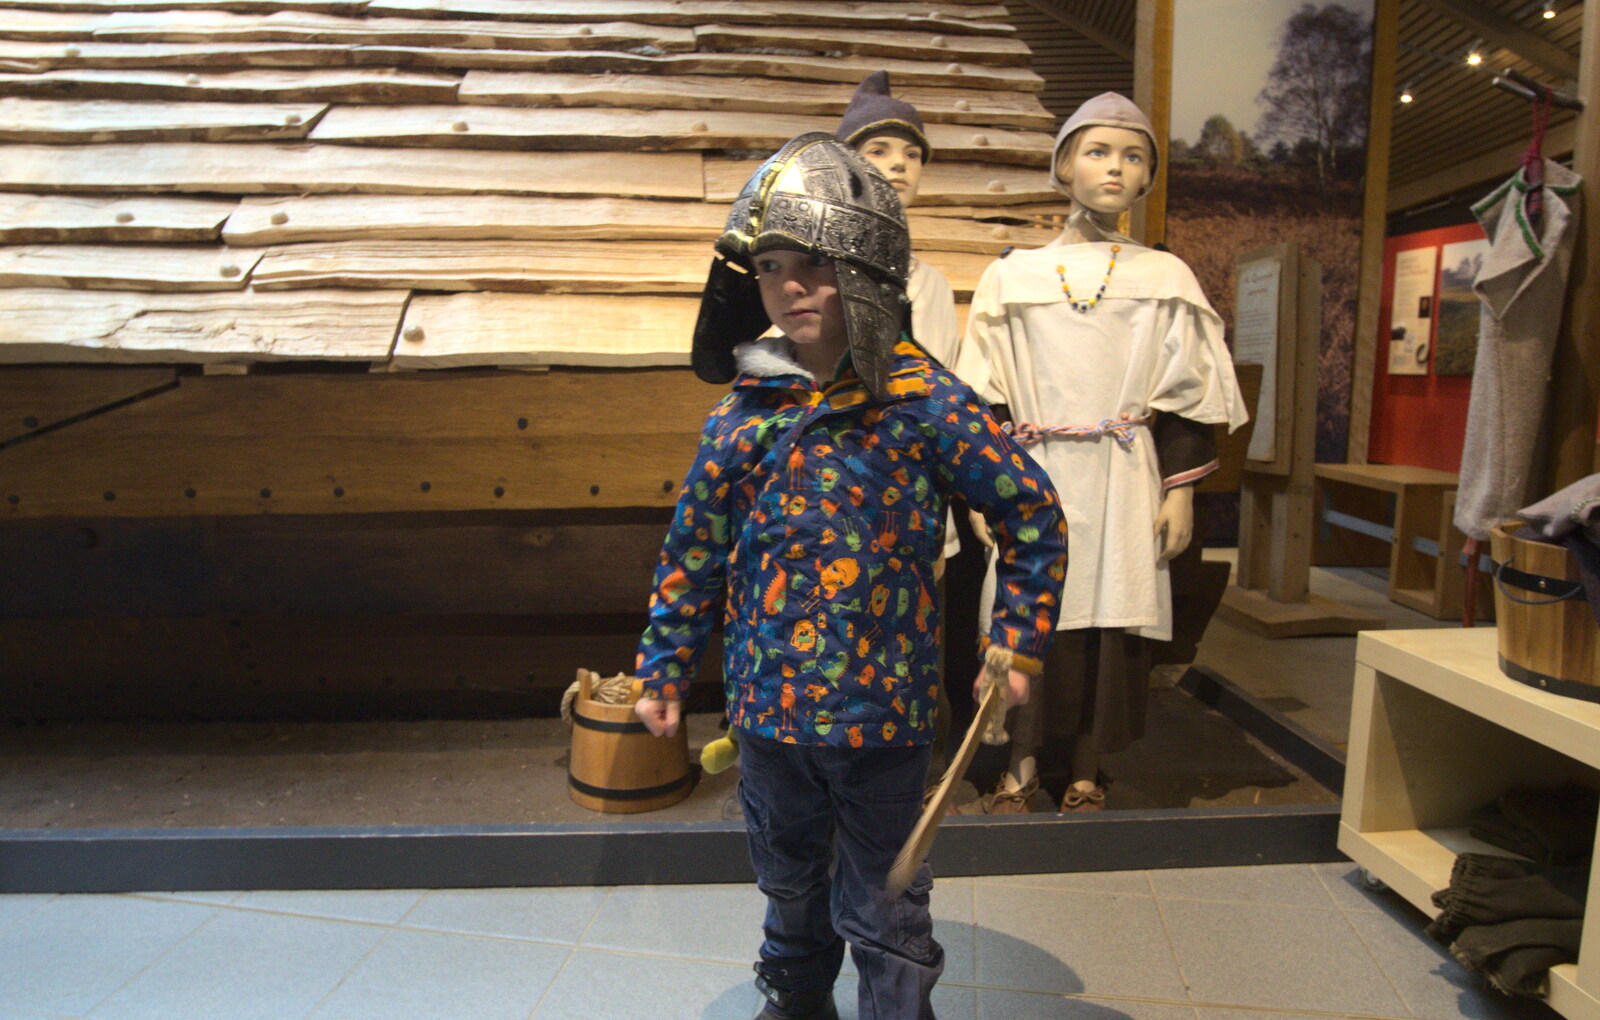 Harry dresses up from A Trip to Sutton Hoo, Woodbridge, Suffolk - 29th January 2017